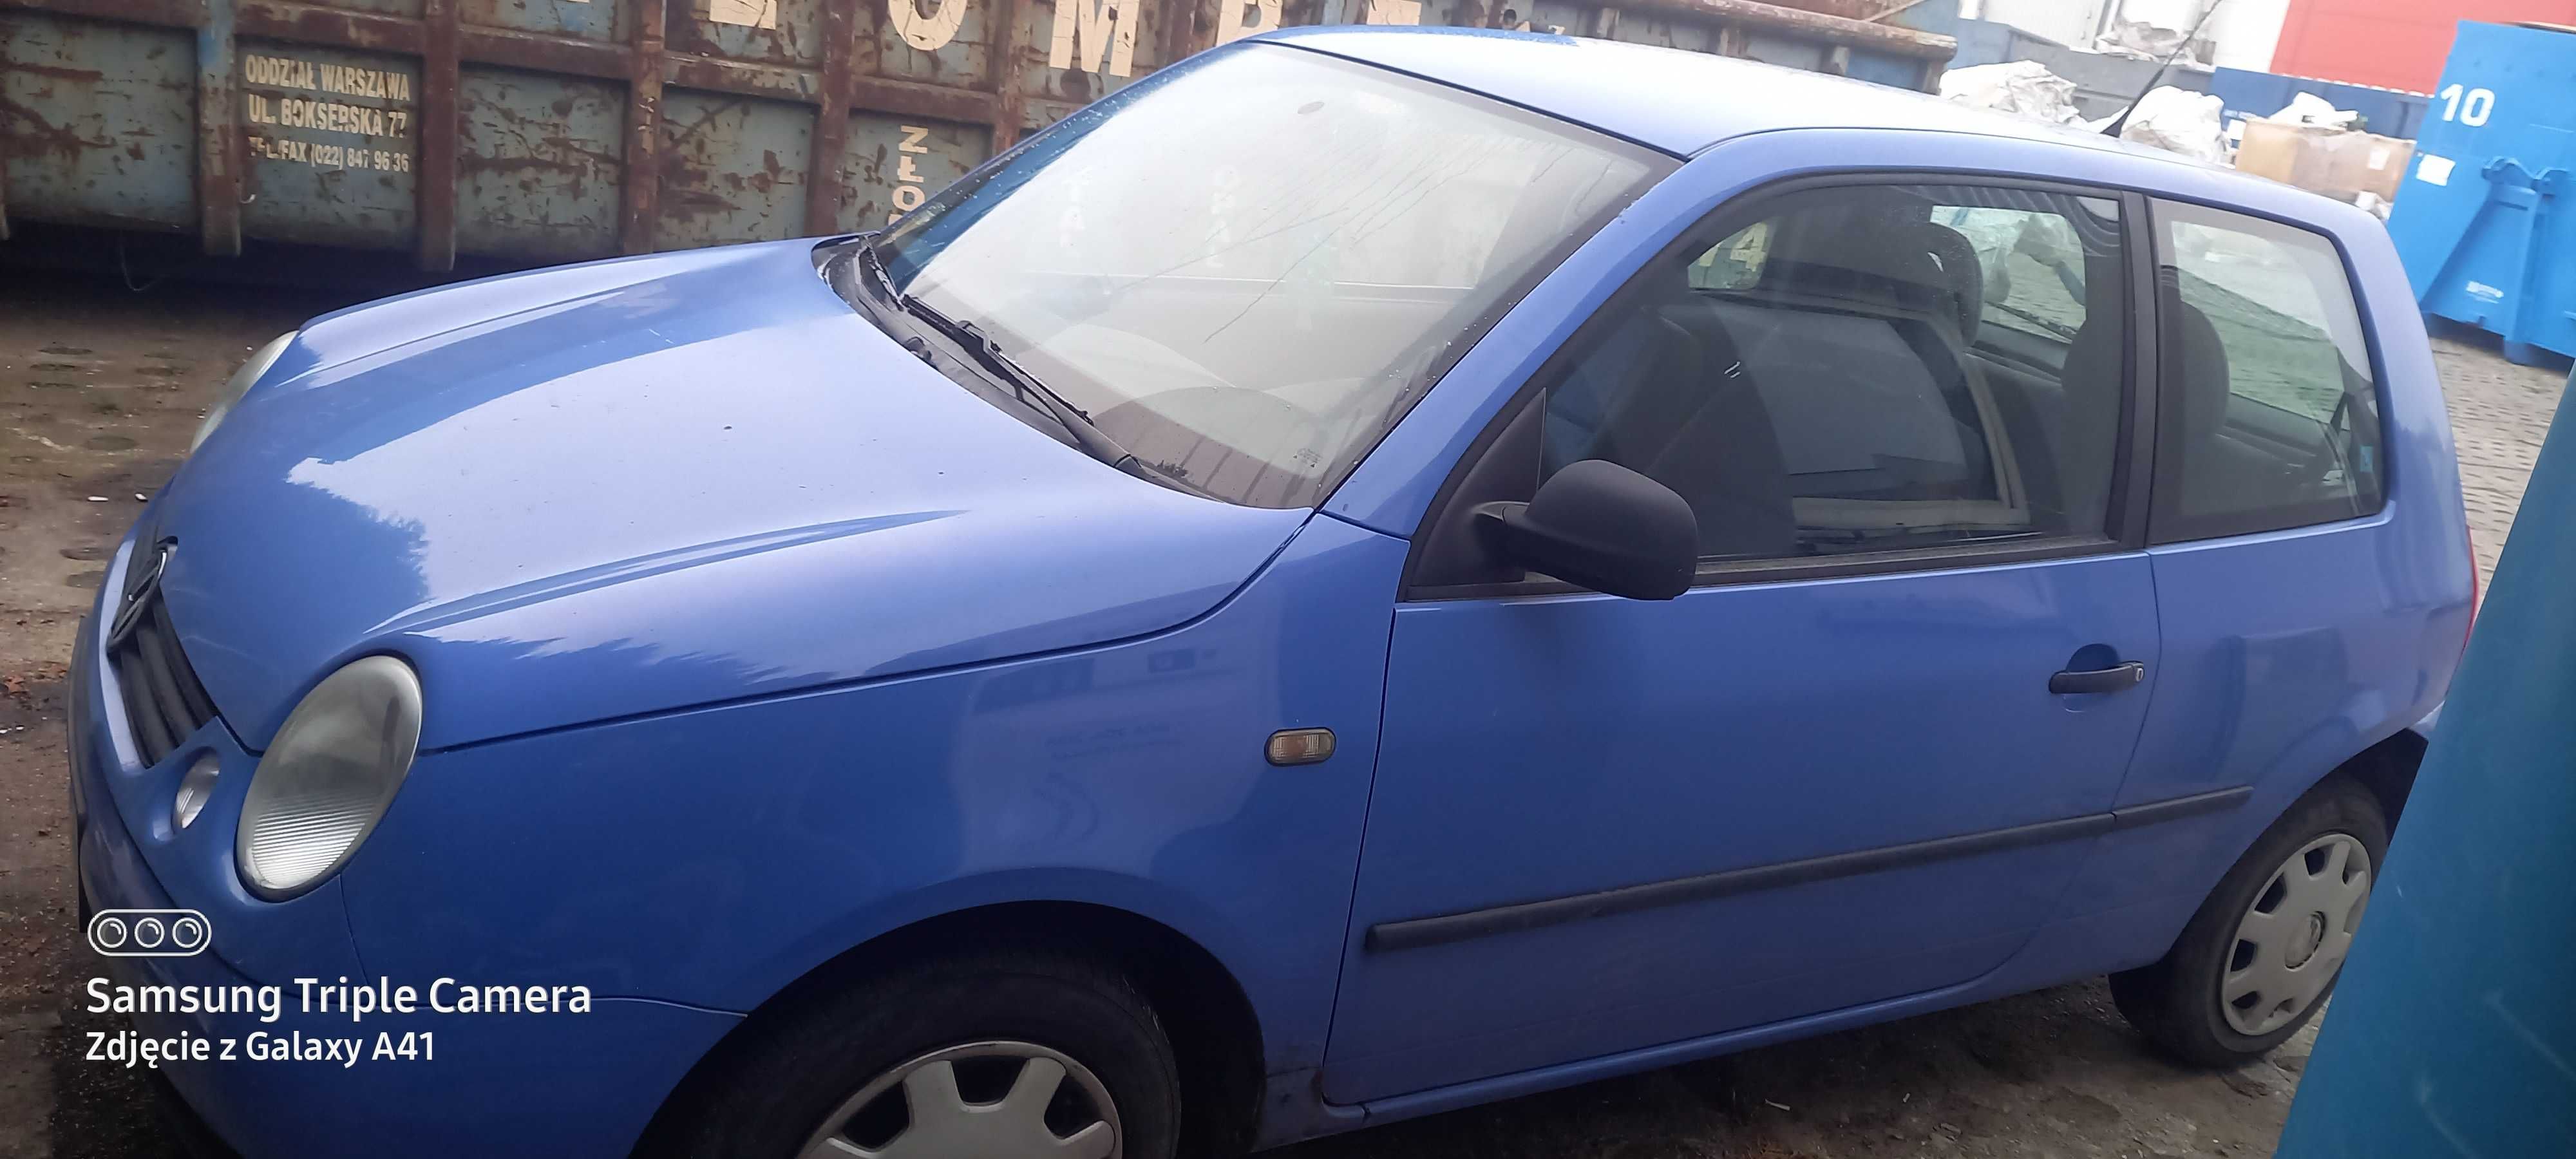 Volkswagen LUPO 1.0 benzyna